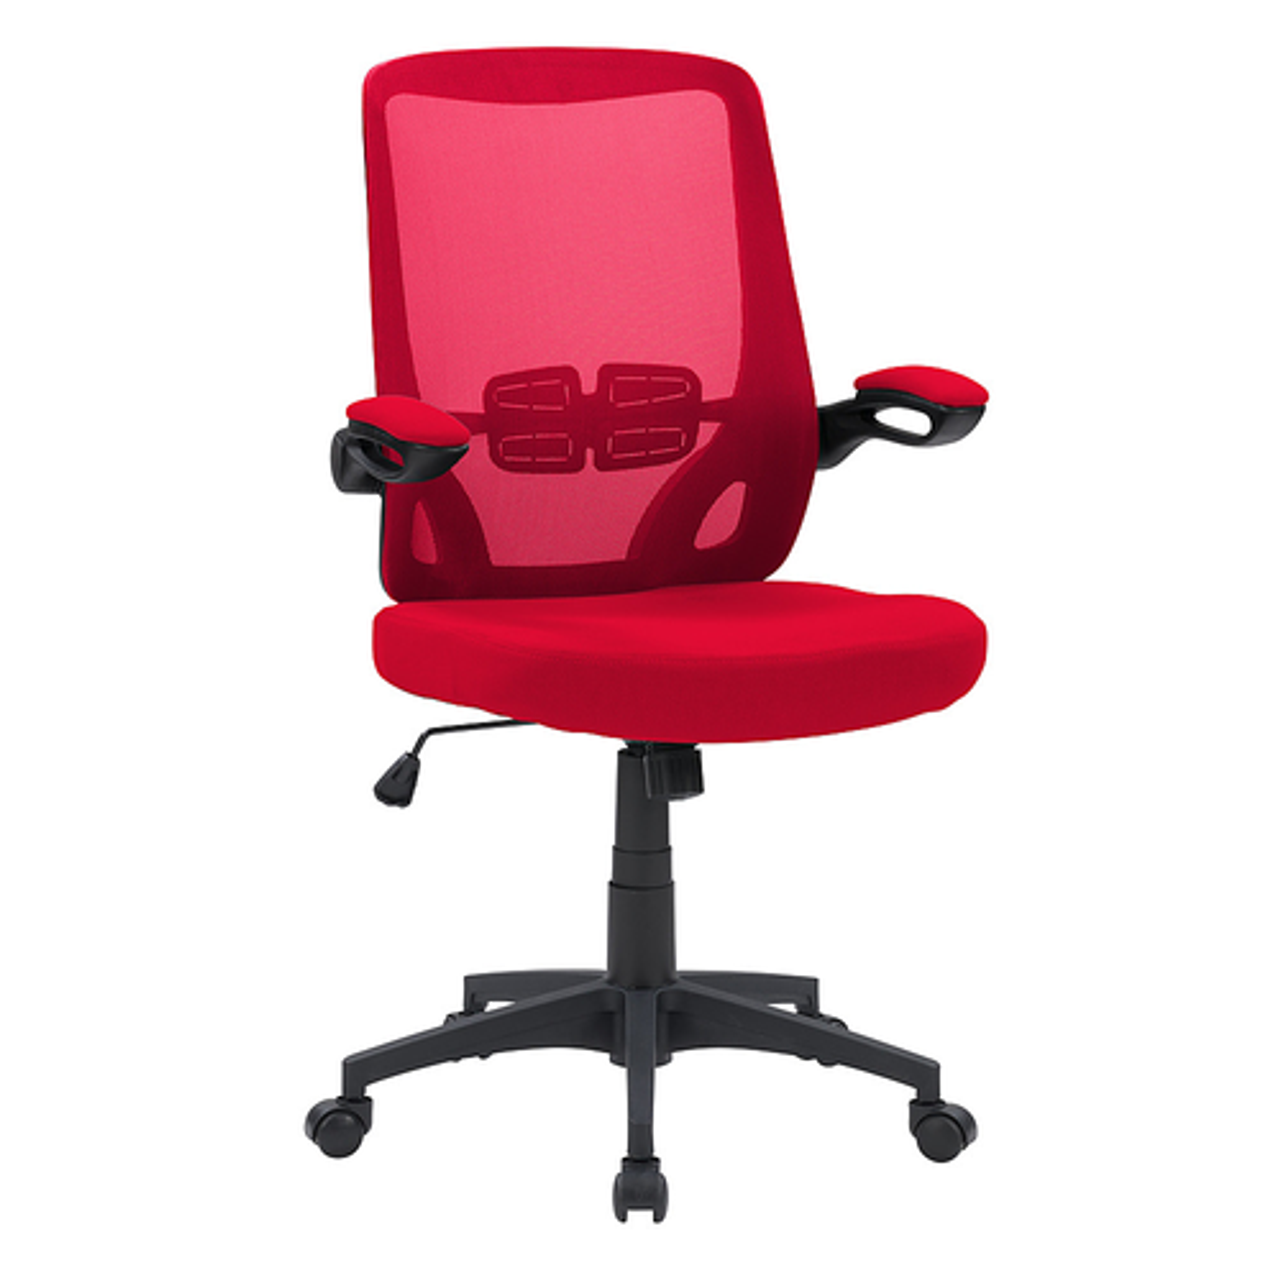 CorLiving Workspace High Mesh Back Office Chair in - Red